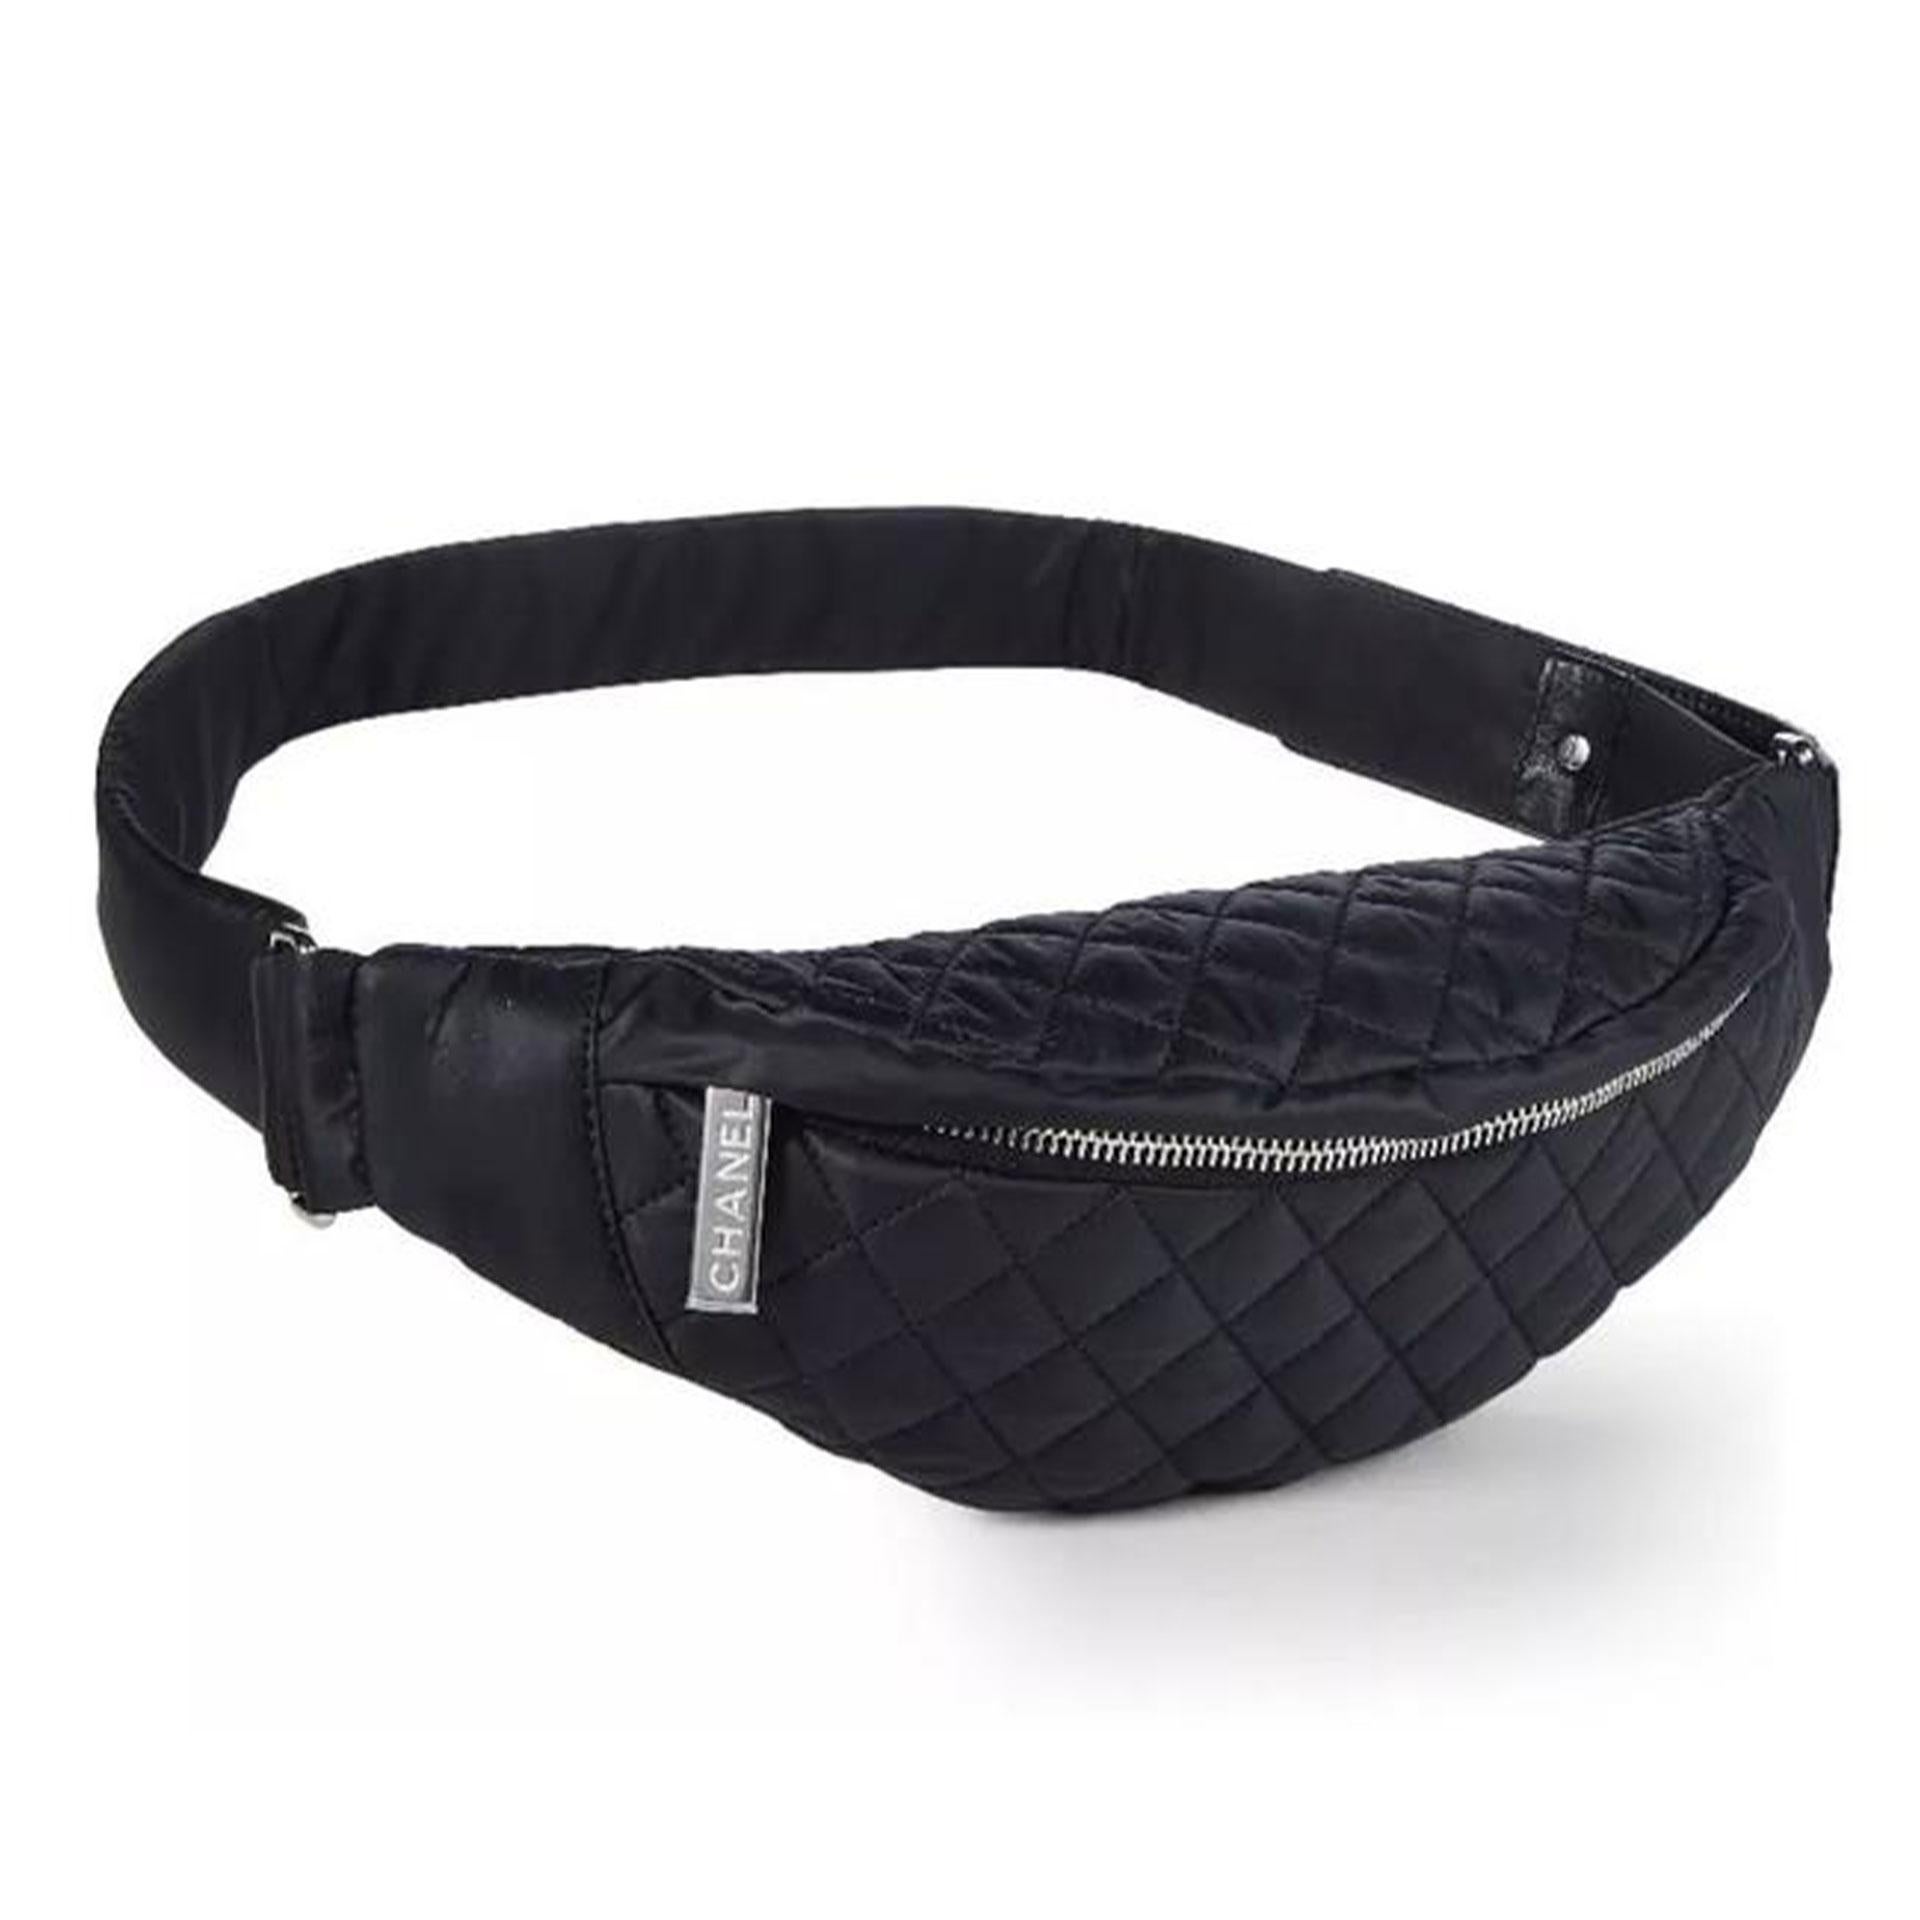 Chanel Sport Fanny Pack Waist Bag Crossbody Banane Rare Soldout

Silver hardware
Zip closure with CC engraving
Adjustable waist strap
Nylon lining

Made in Italy